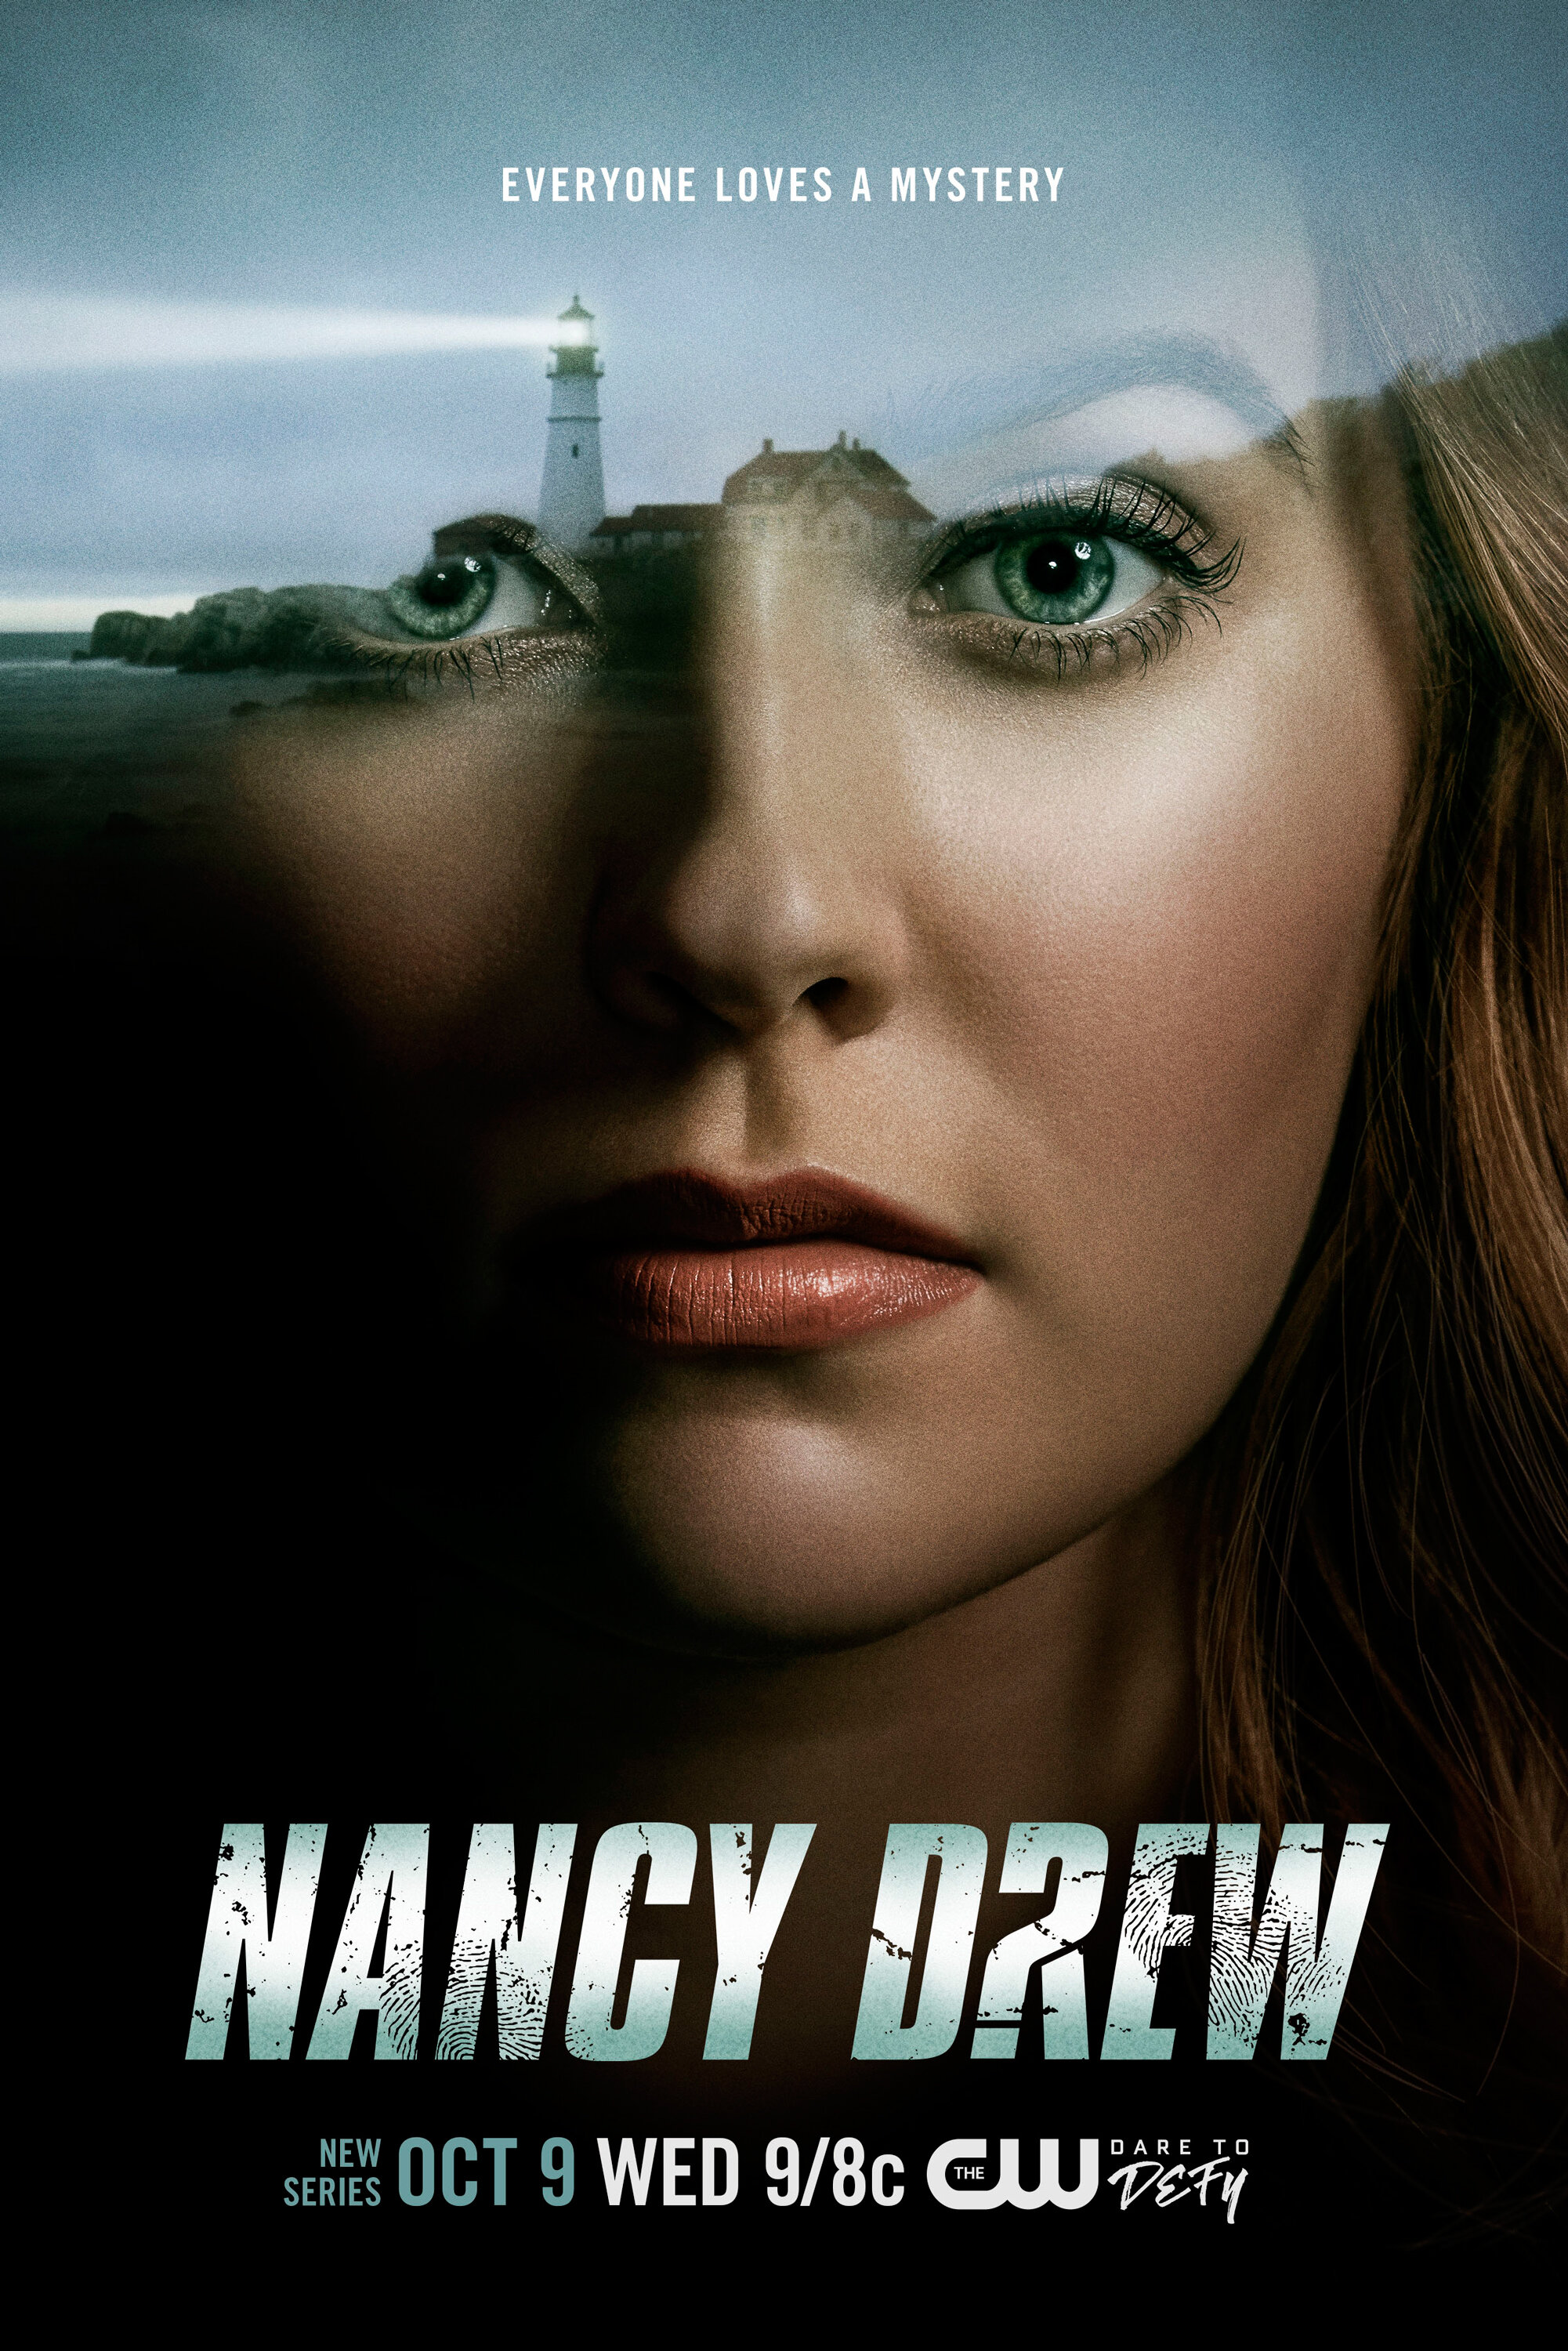 Promotional Material for "Nancy Drew"